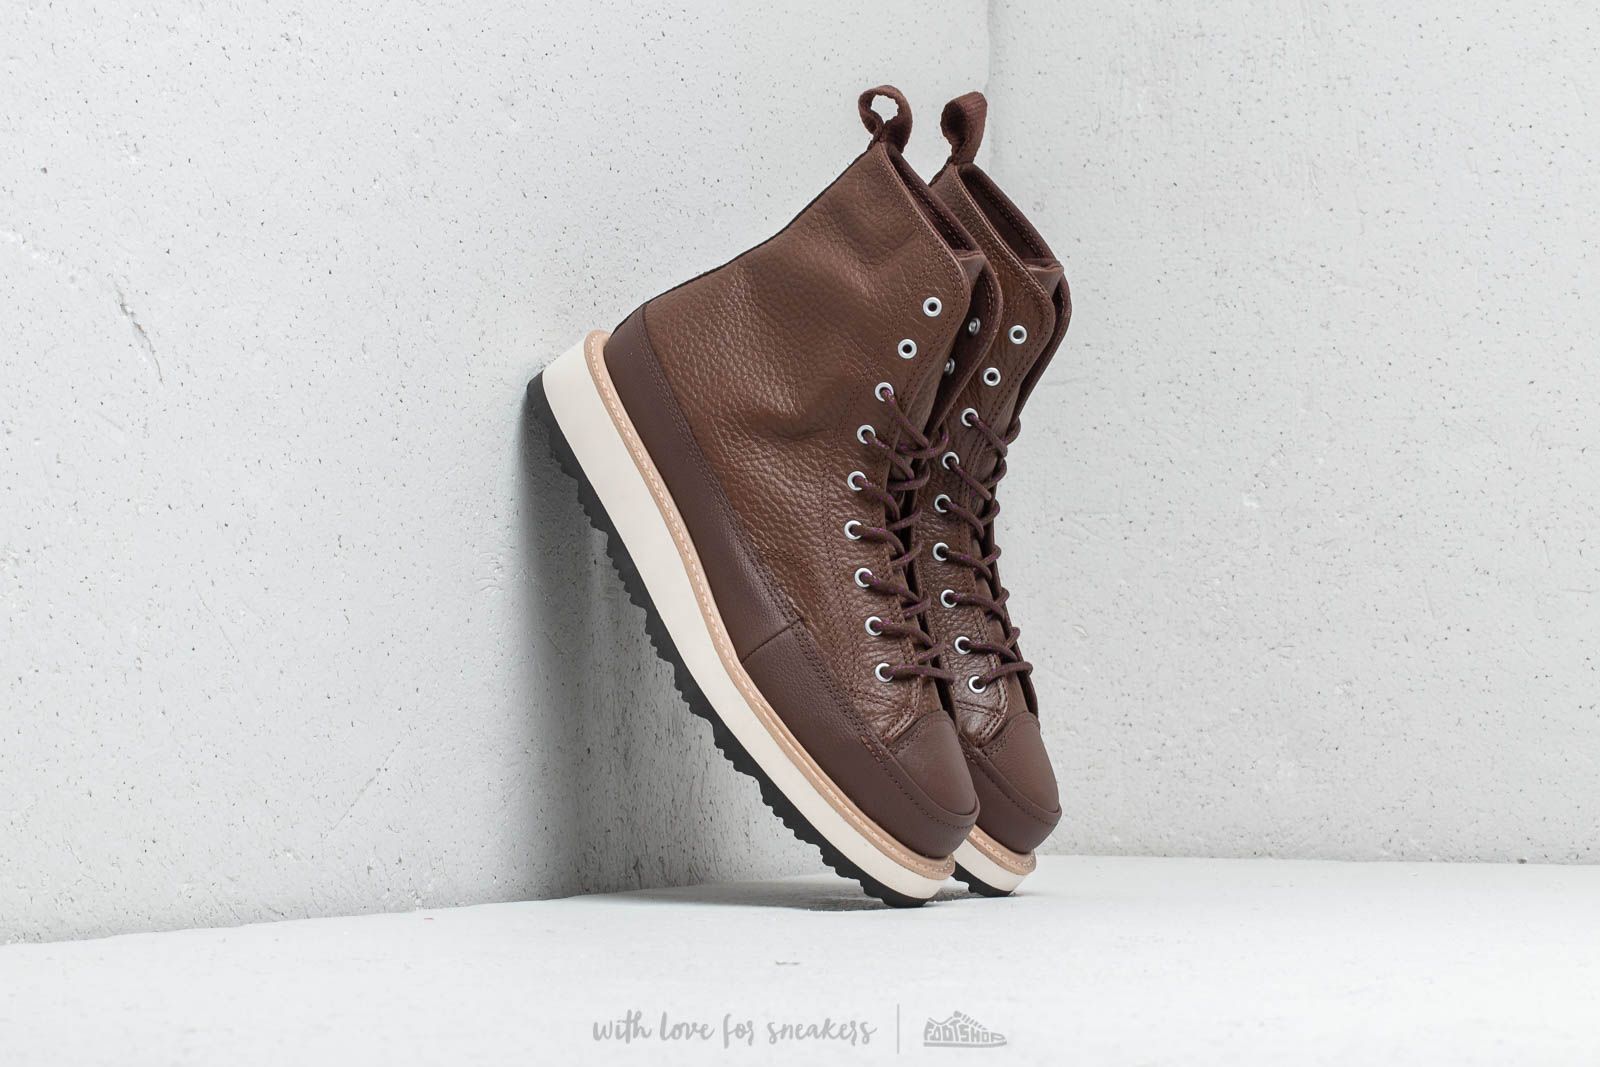 Buty męskie Converse Chuck Taylor All Stars Crafted Boot High Chocolate/ Light Fawn/ Black